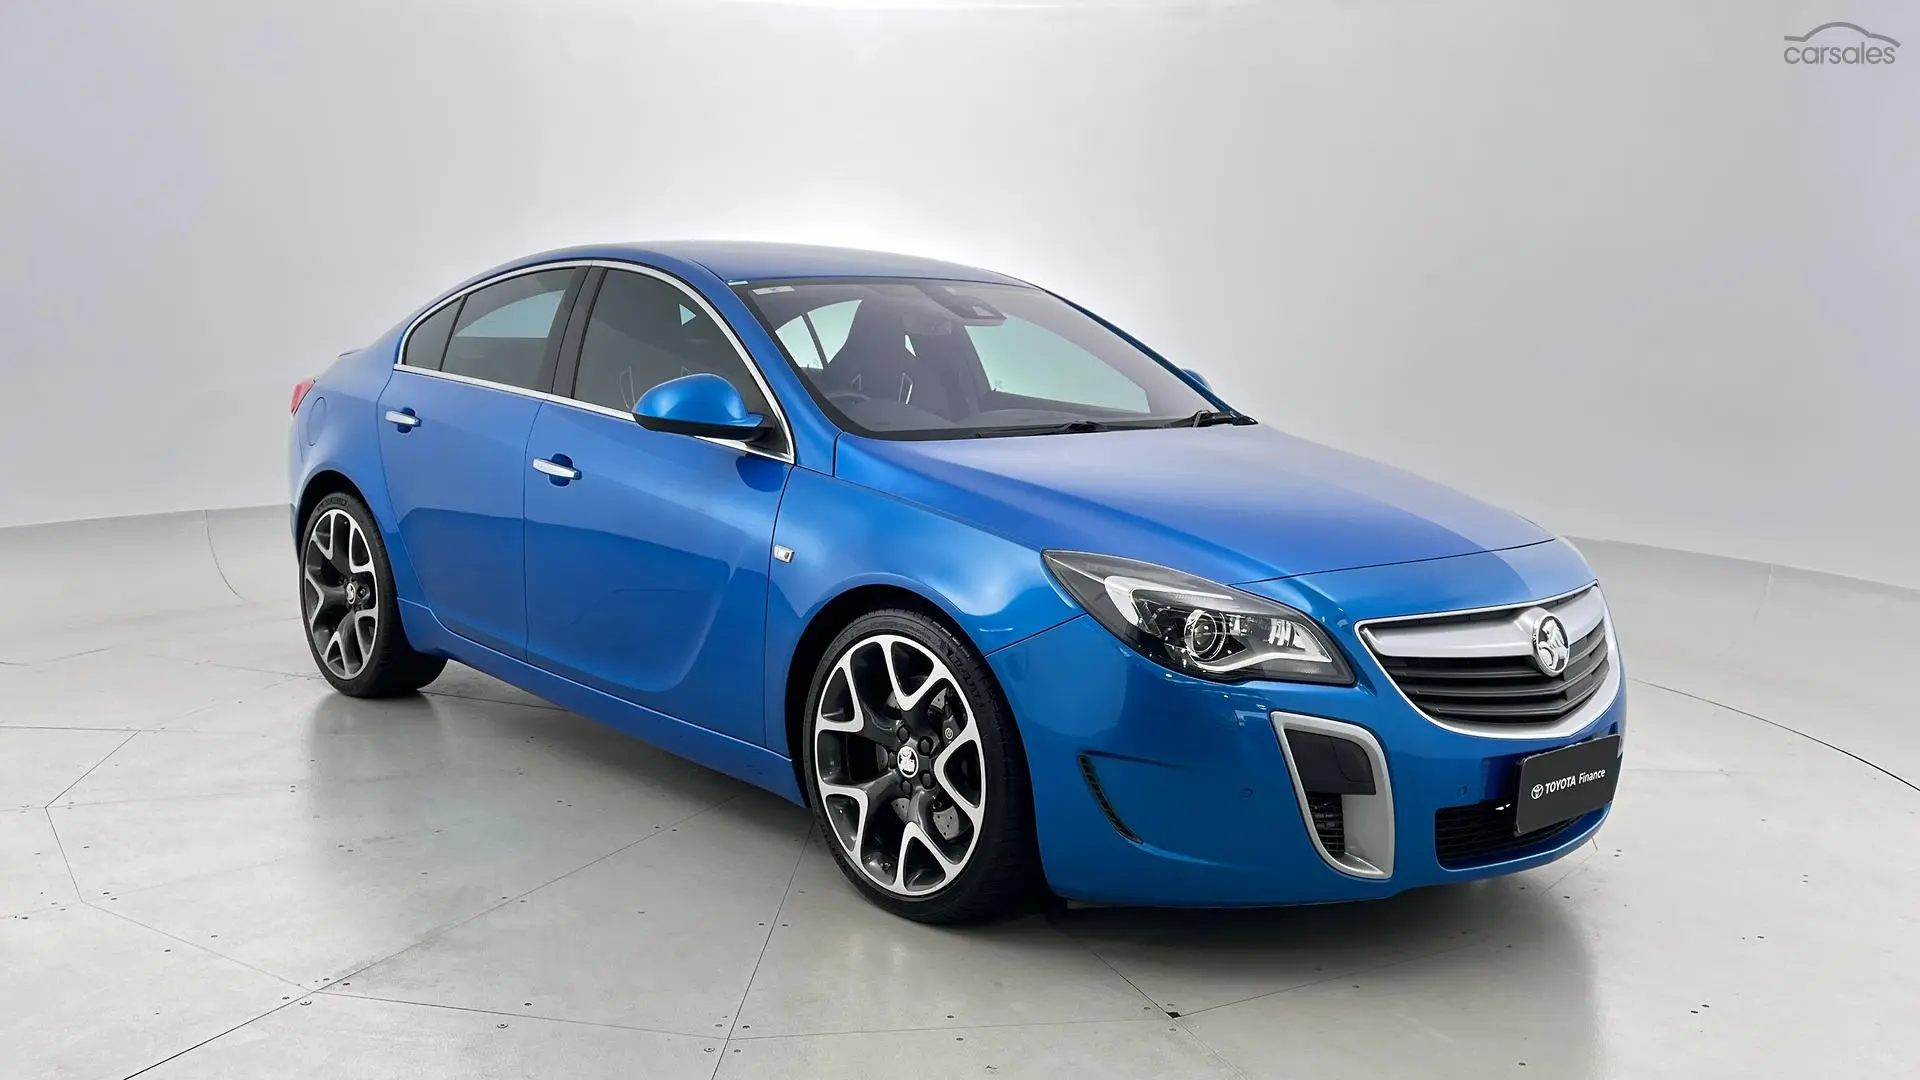 2015 Holden Insignia Image 1